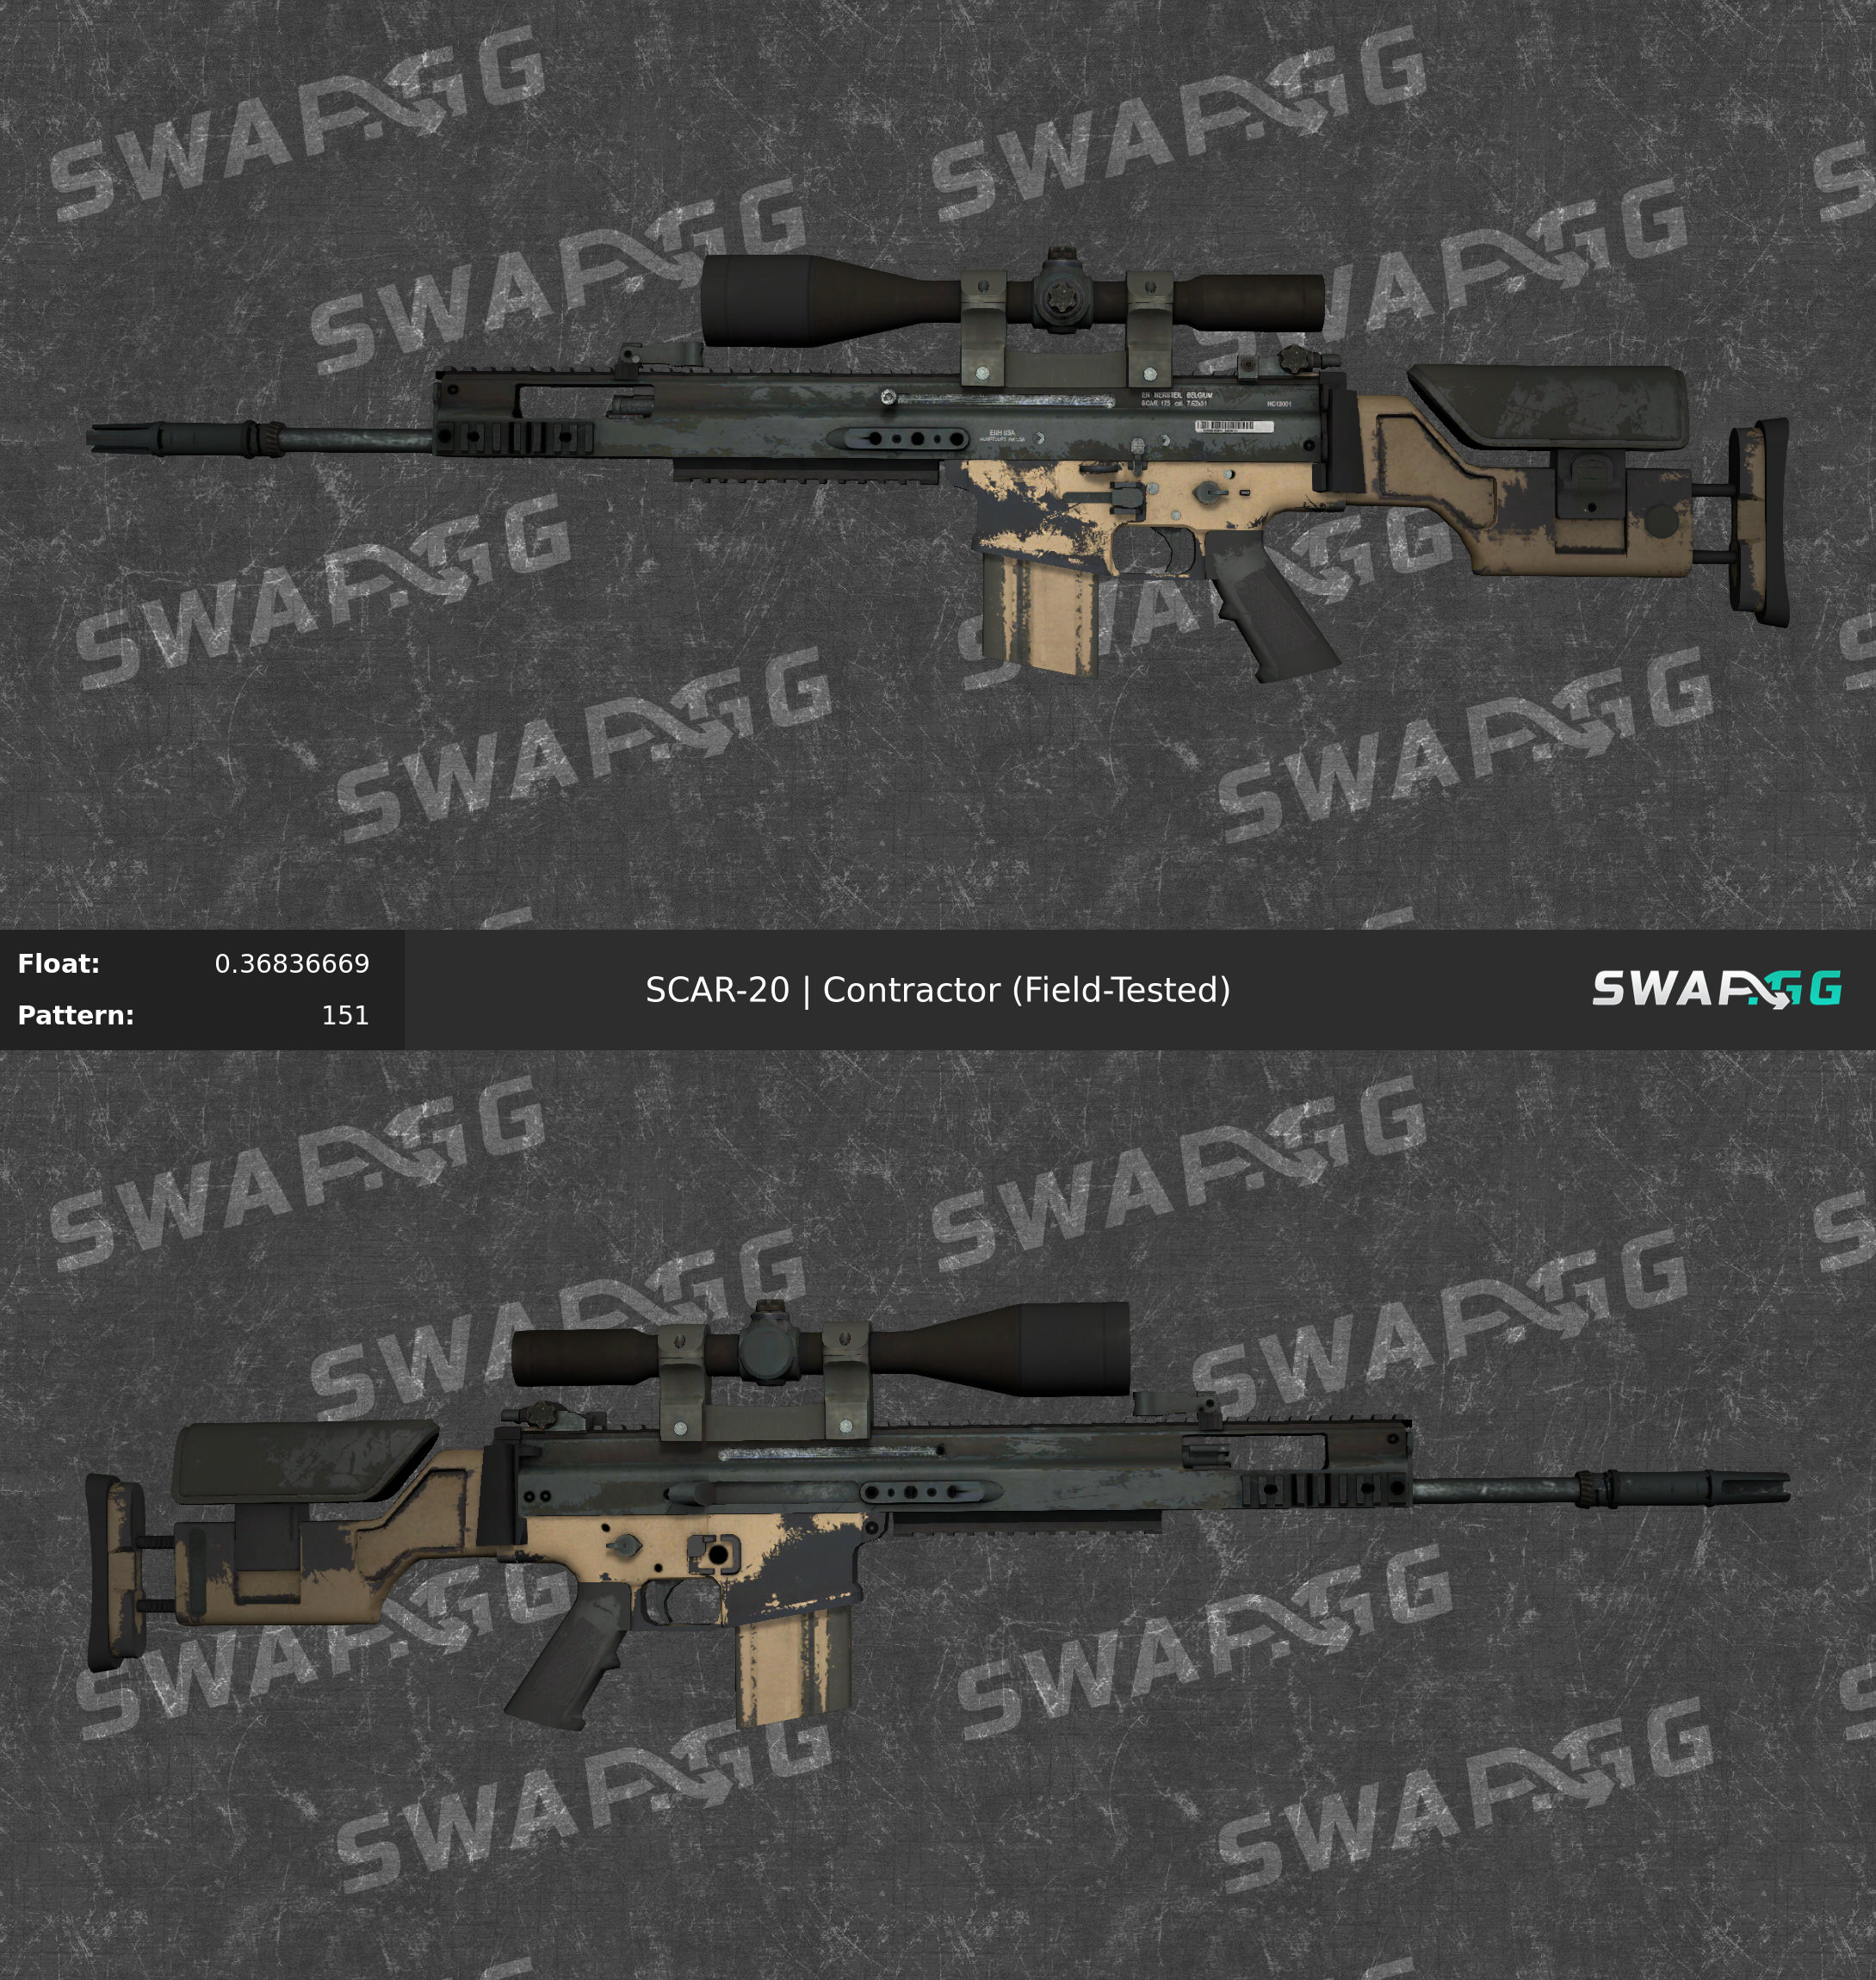 download the new for windows SCAR-20 Contractor cs go skin